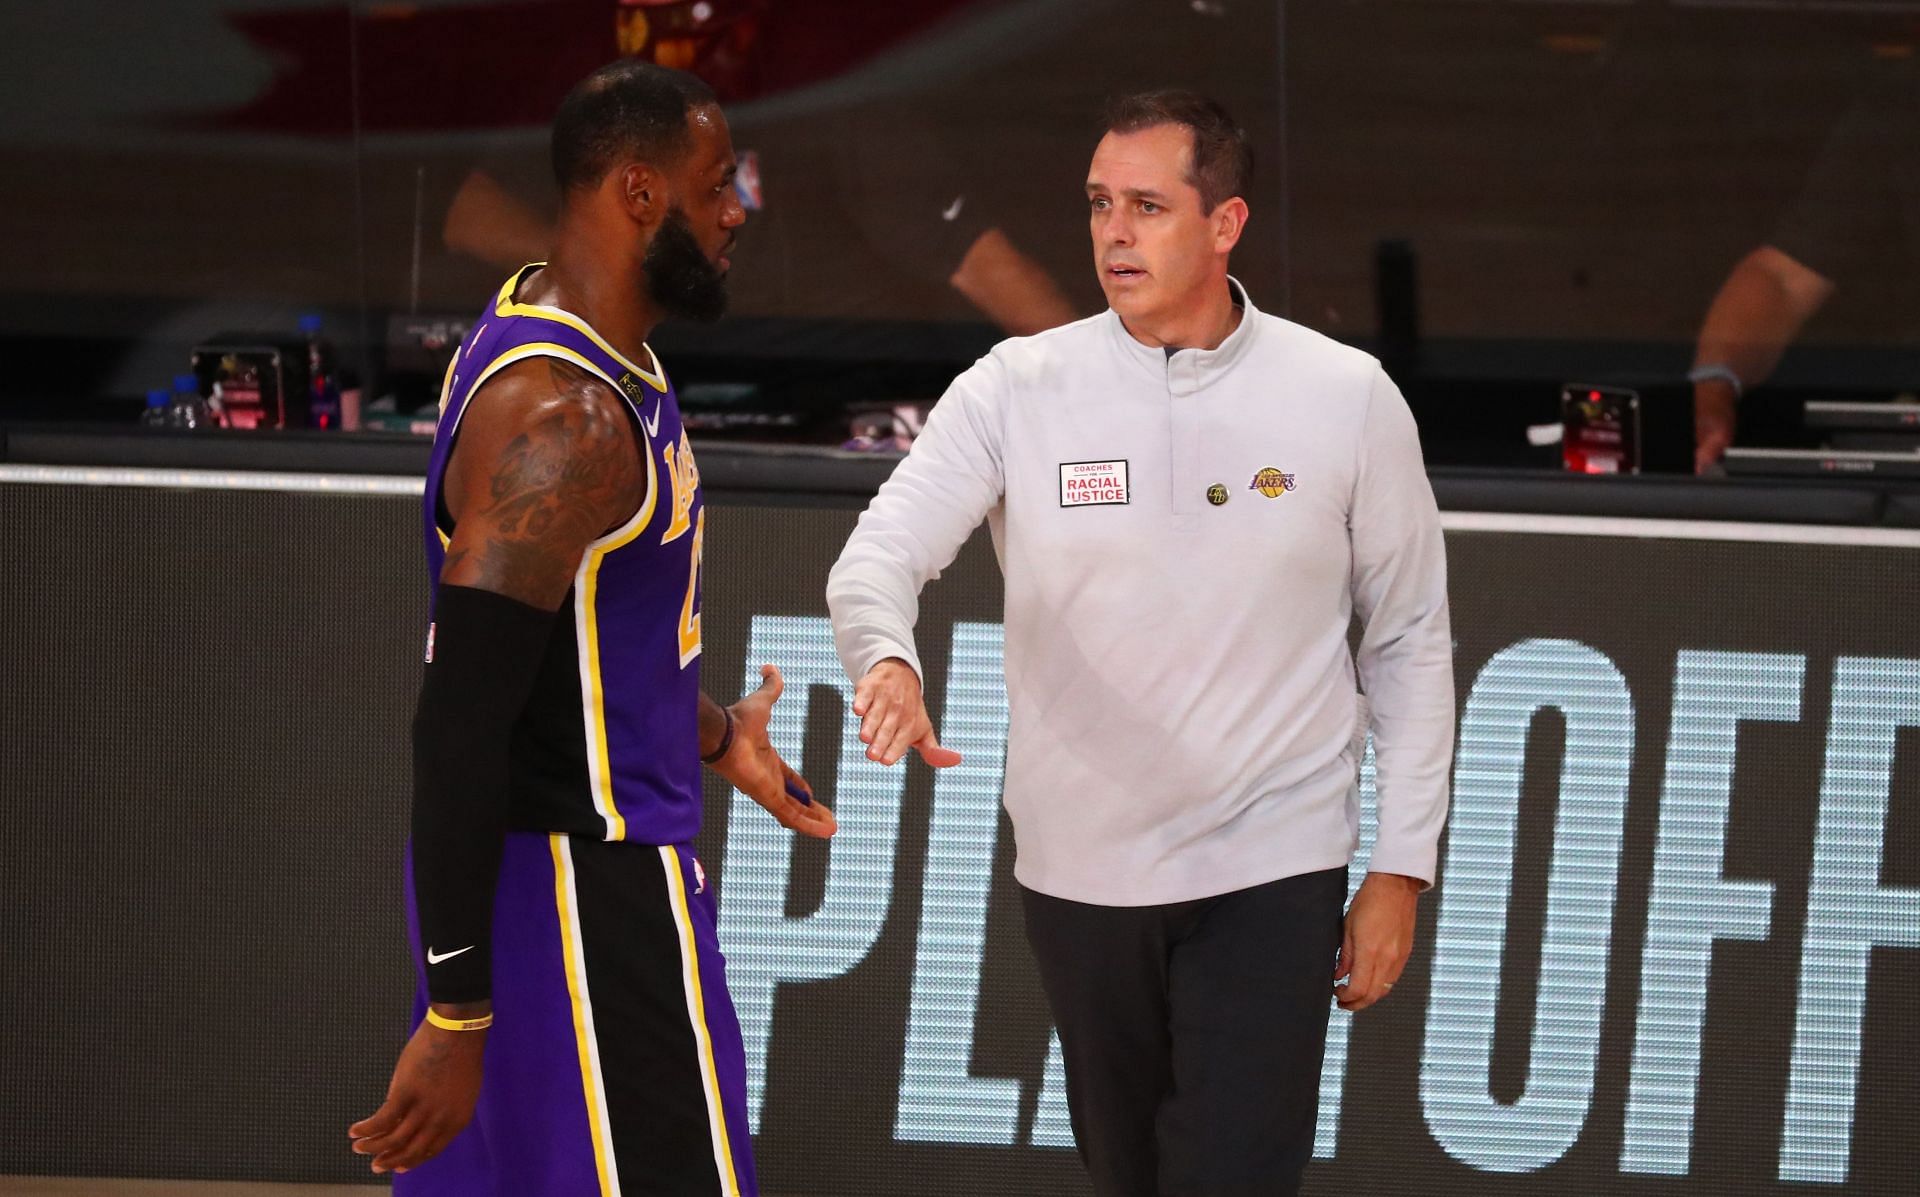 Los Angeles Lakers player LeBron James and head coach Frank Vogel